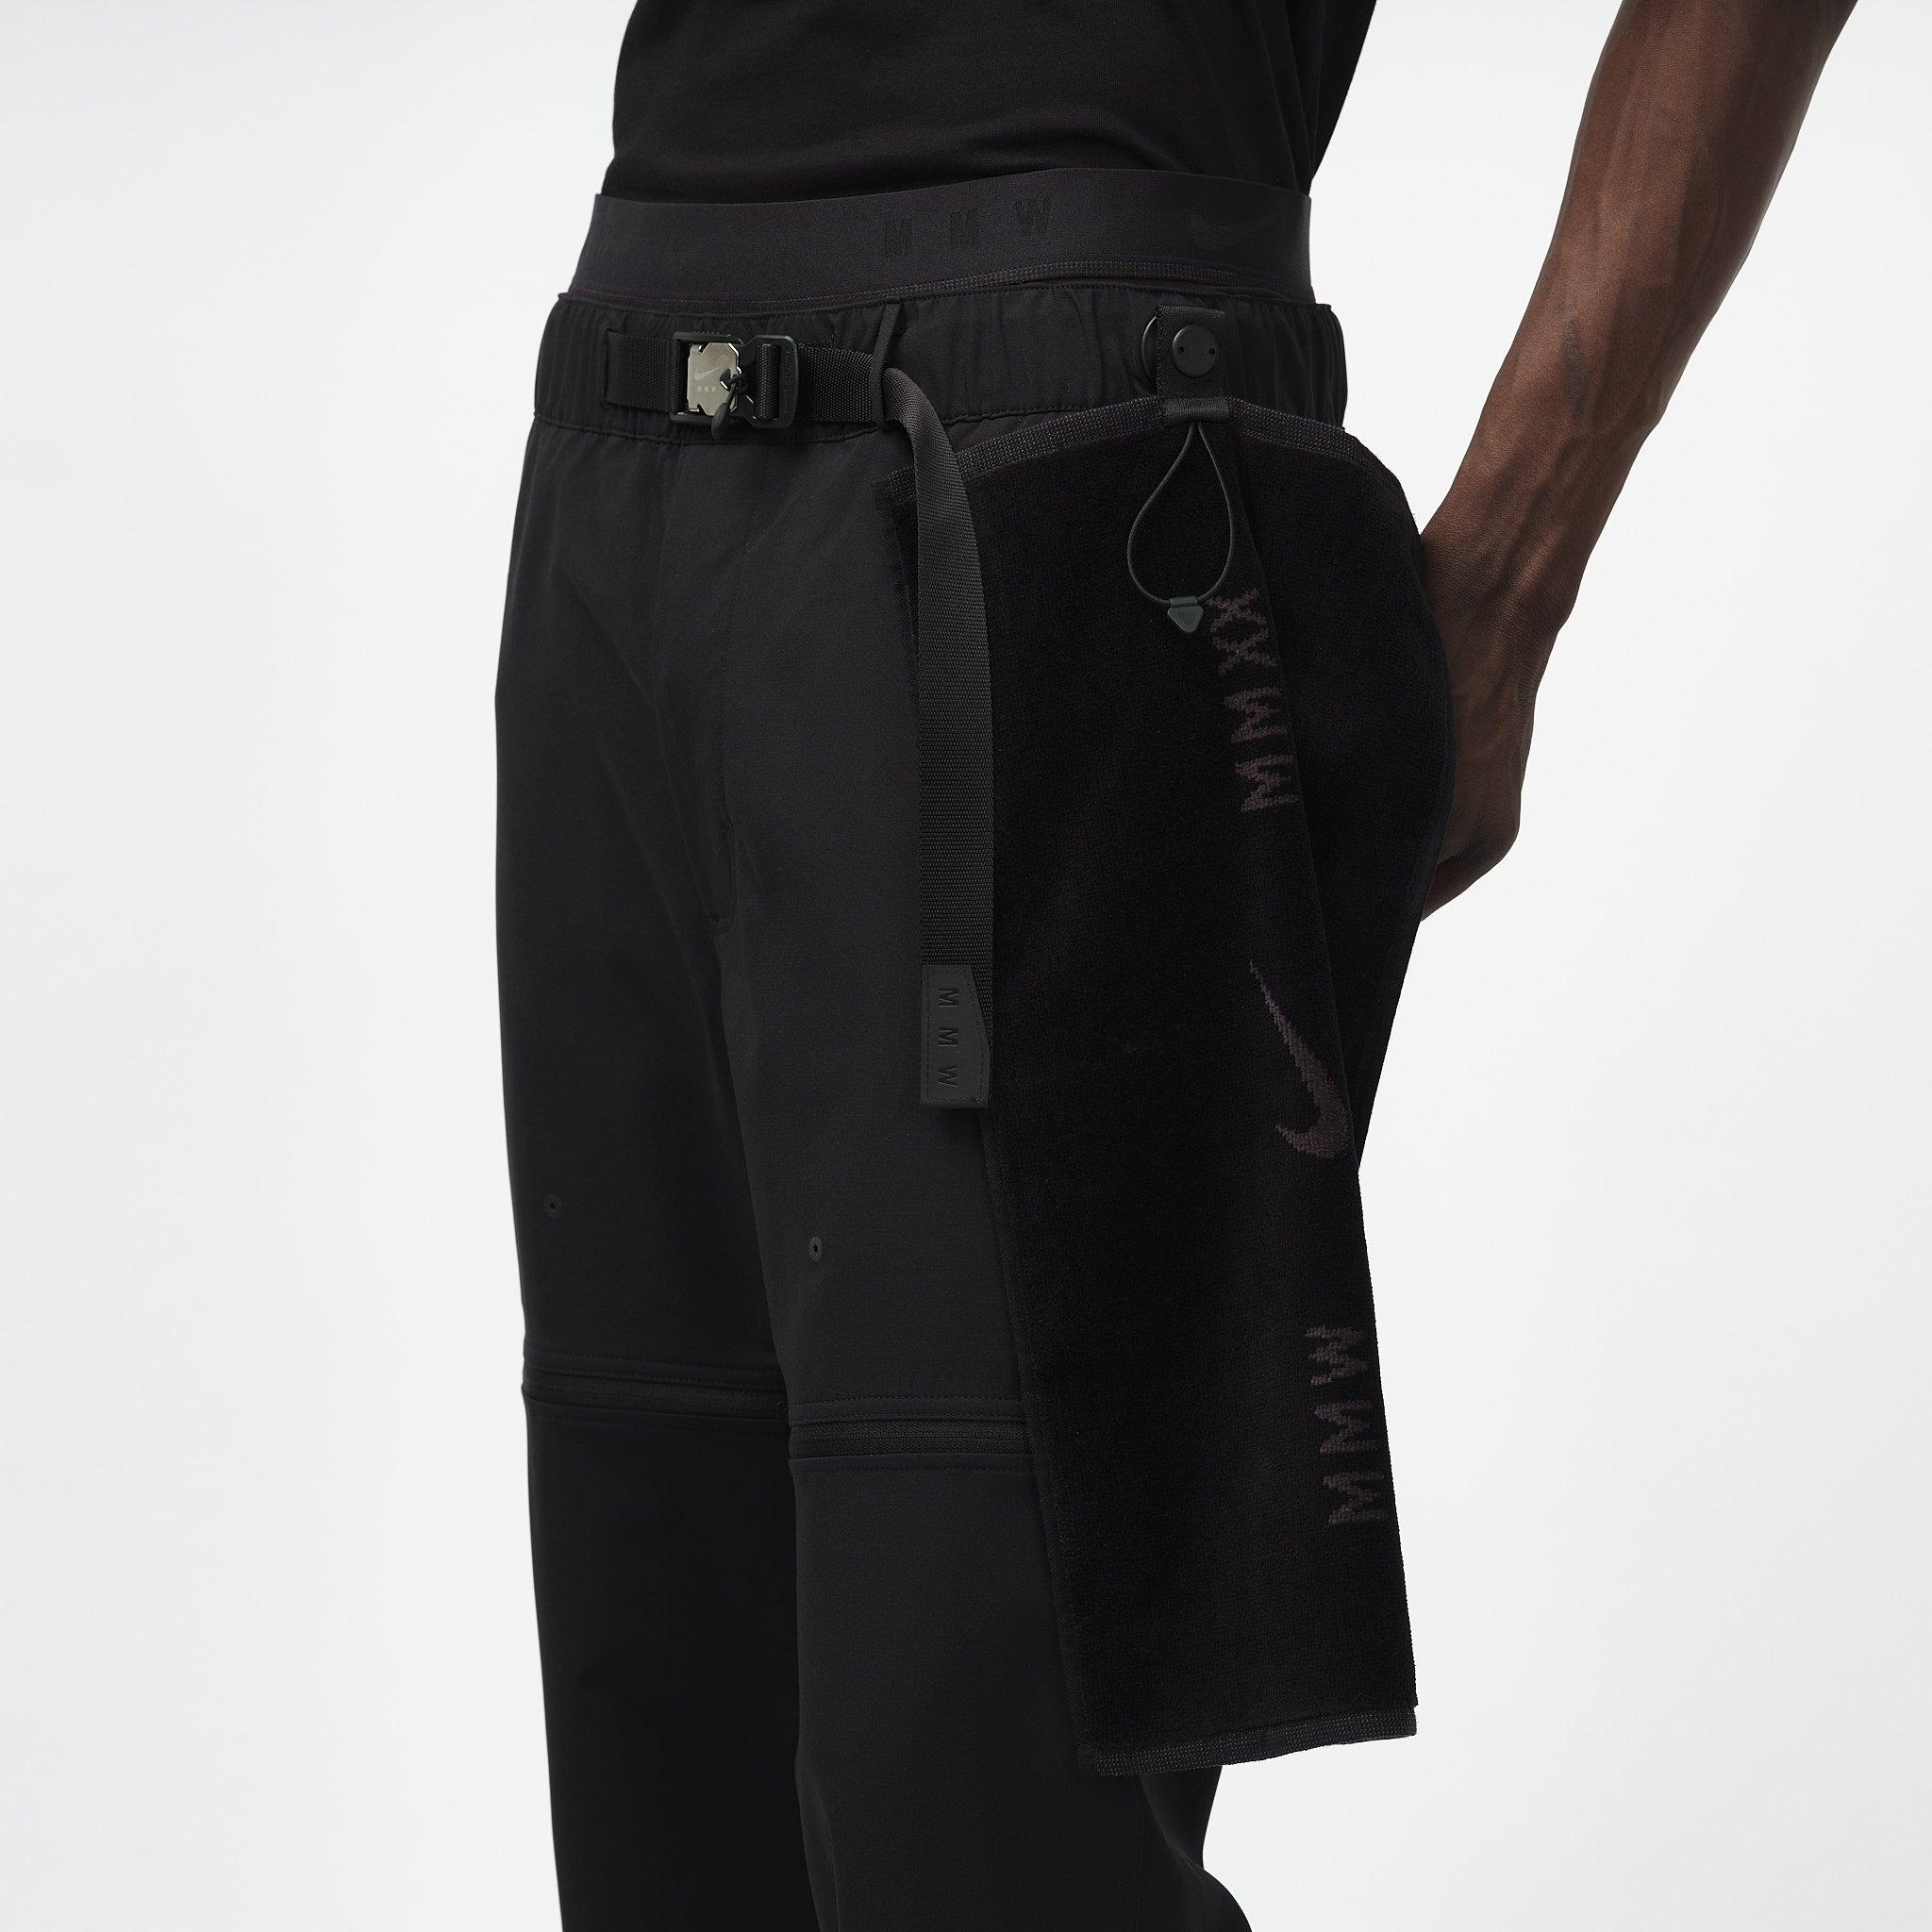 Nike Mmw X 3-in-1 Convertible Pants In Black For Men Lyst | lupon.gov.ph